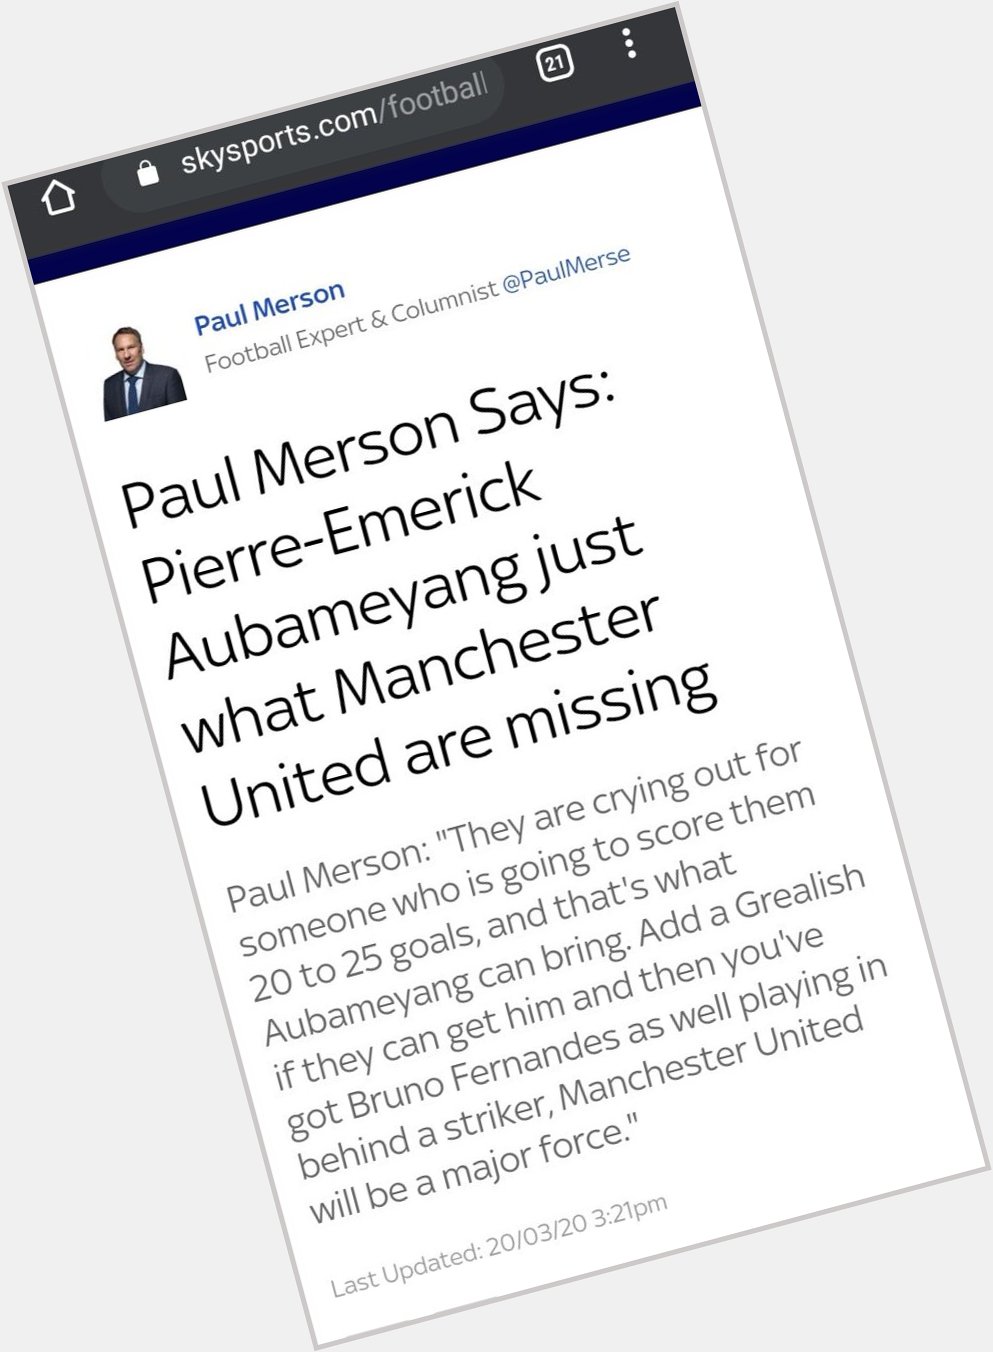 Paul Merson\s birthday today. wished him a happy birthday because...

Then Paul responds with this... 